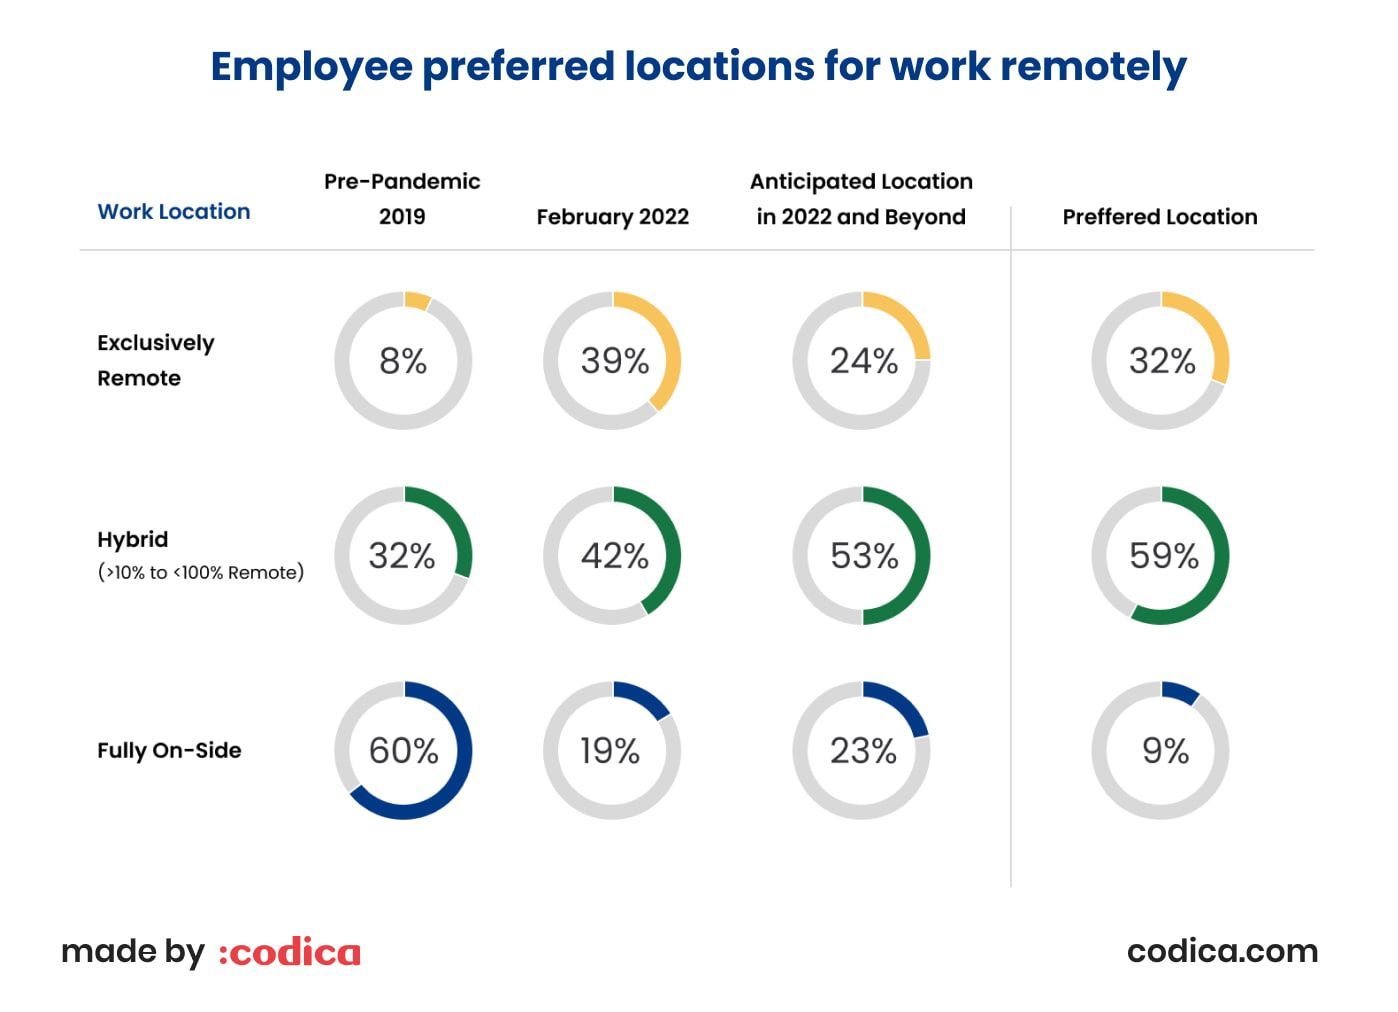 Current employee work locations for work remotely